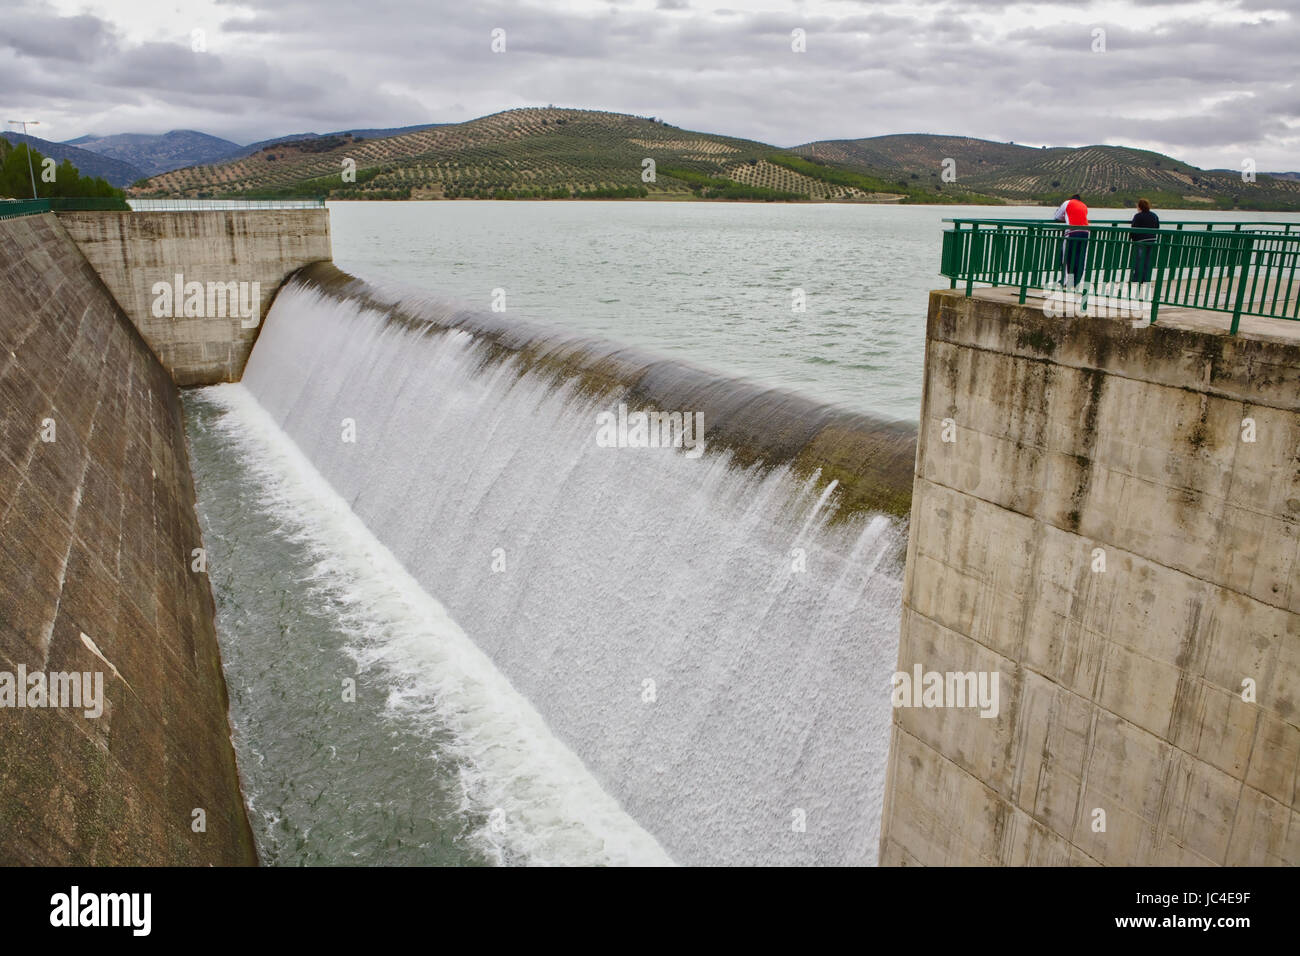 Colomera reservoir releasing water after heavy rains of winter, is situated on the river Colomera and Juntas, near the town of Colomera, in the provin Stock Photo